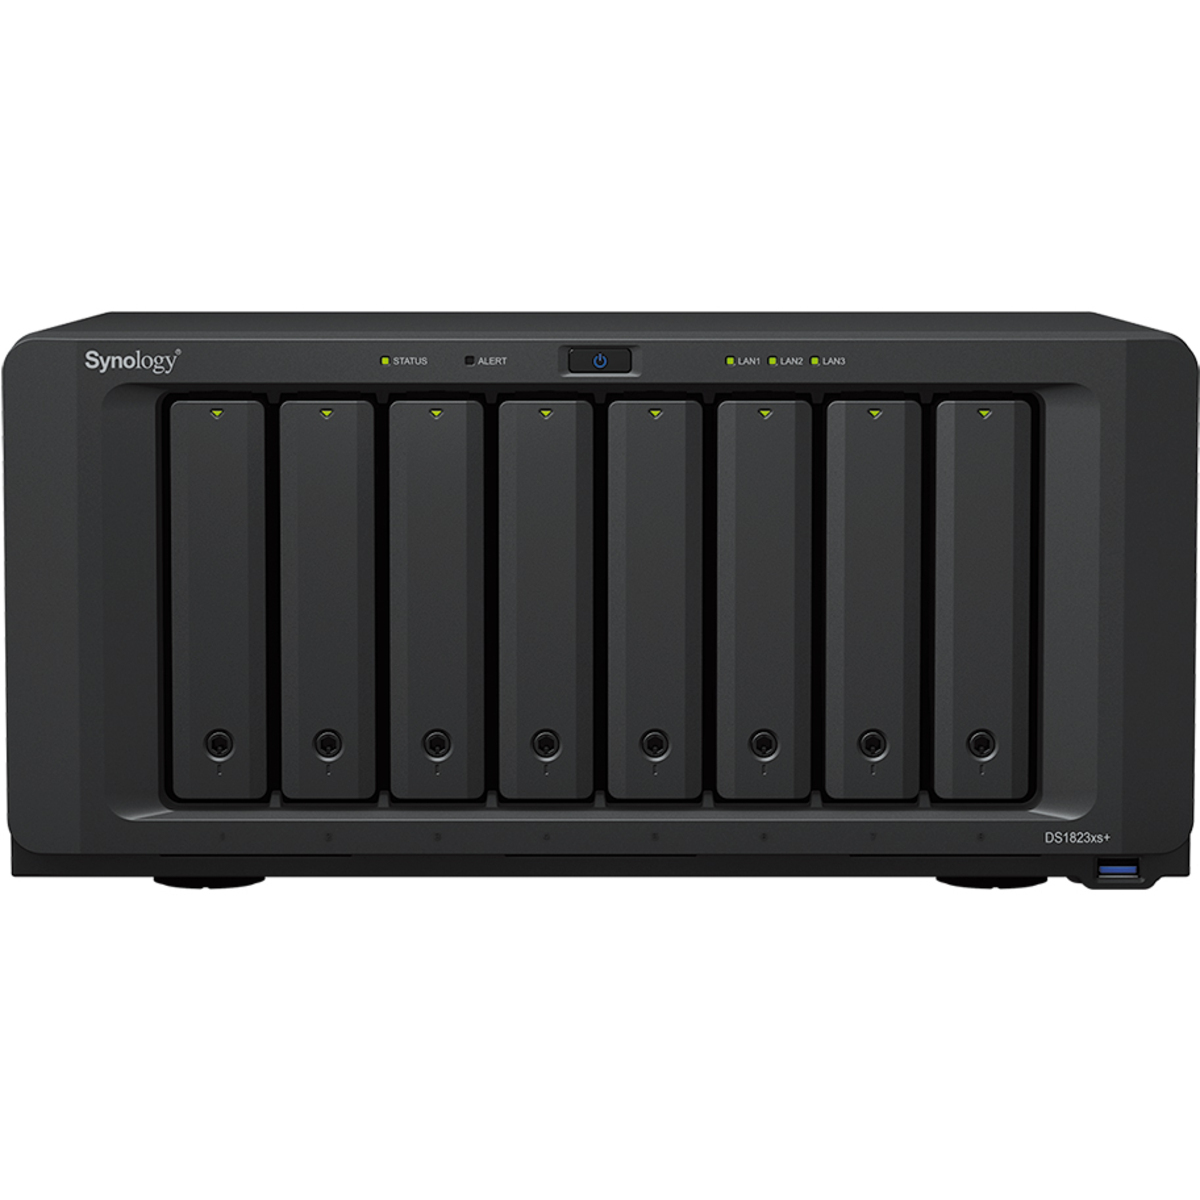 Synology DiskStation DS1823xs+ 80tb 8-Bay Desktop Multimedia / Power User / Business NAS - Network Attached Storage Device 4x20tb Western Digital Red Pro WD201KFGX 3.5 7200rpm SATA 6Gb/s HDD NAS Class Drives Installed - Burn-In Tested DiskStation DS1823xs+